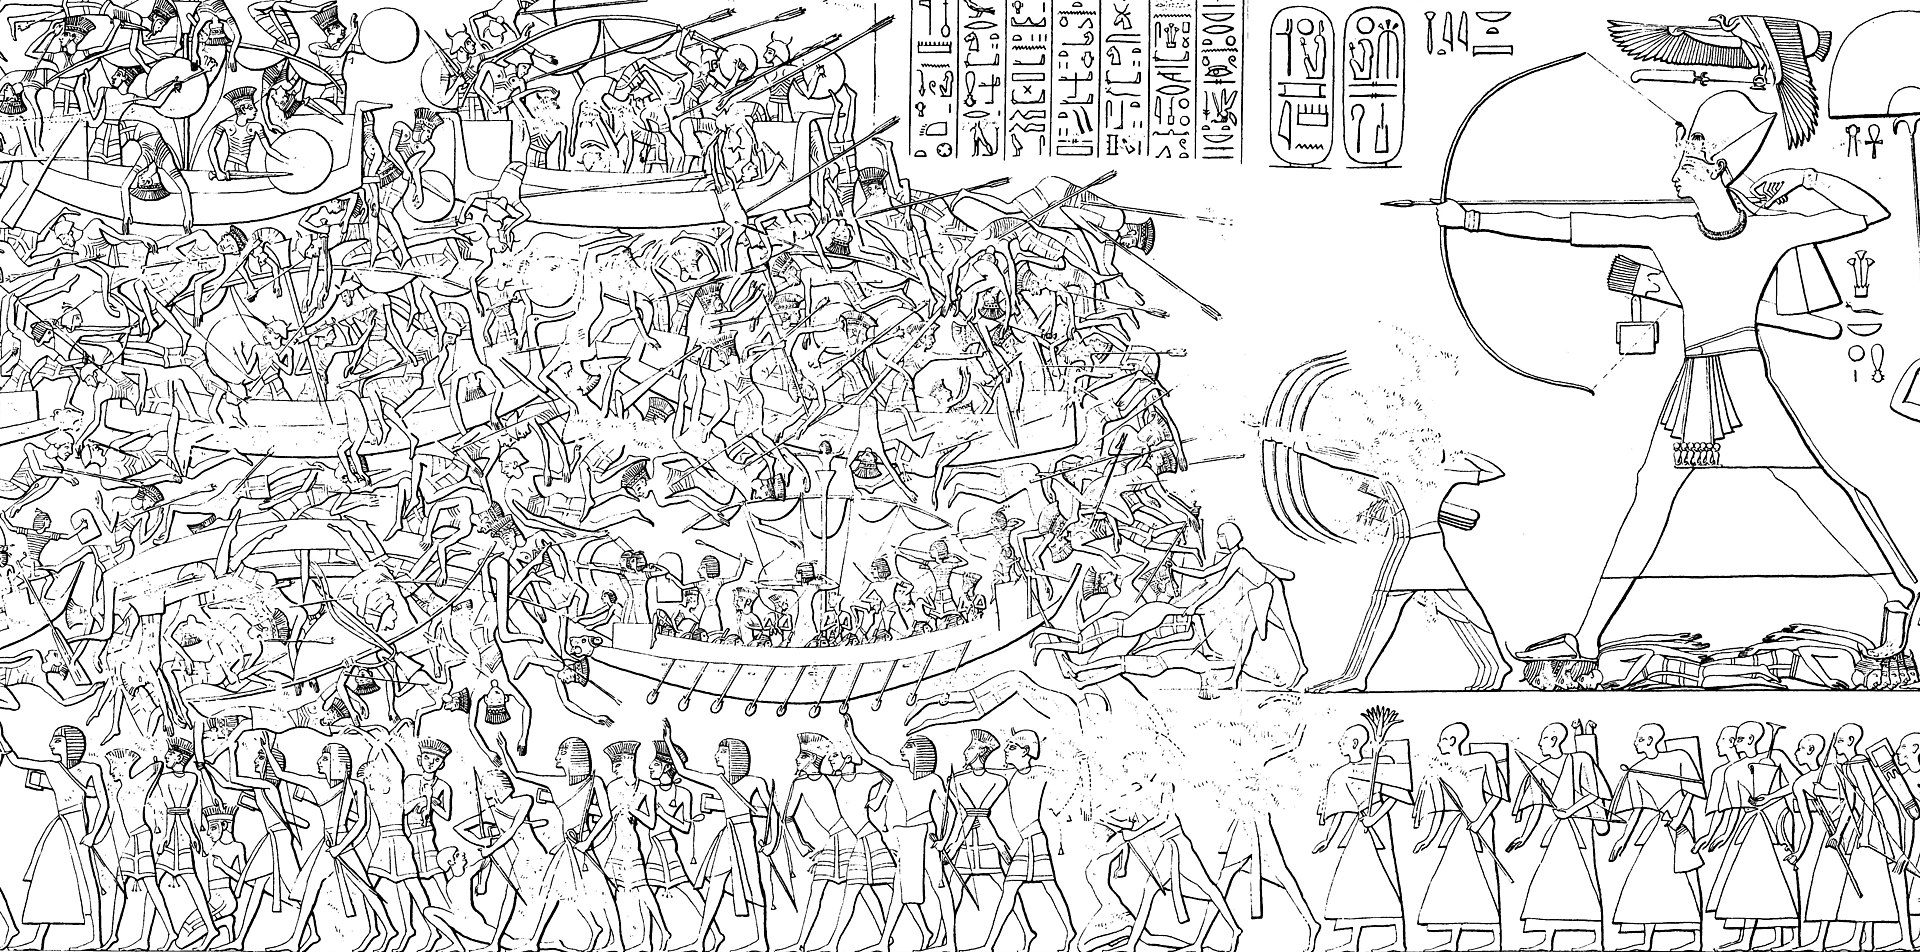 Illustration of a relief depicting Sea Peoples fighting against Egyptians in the Battle of the Delta.